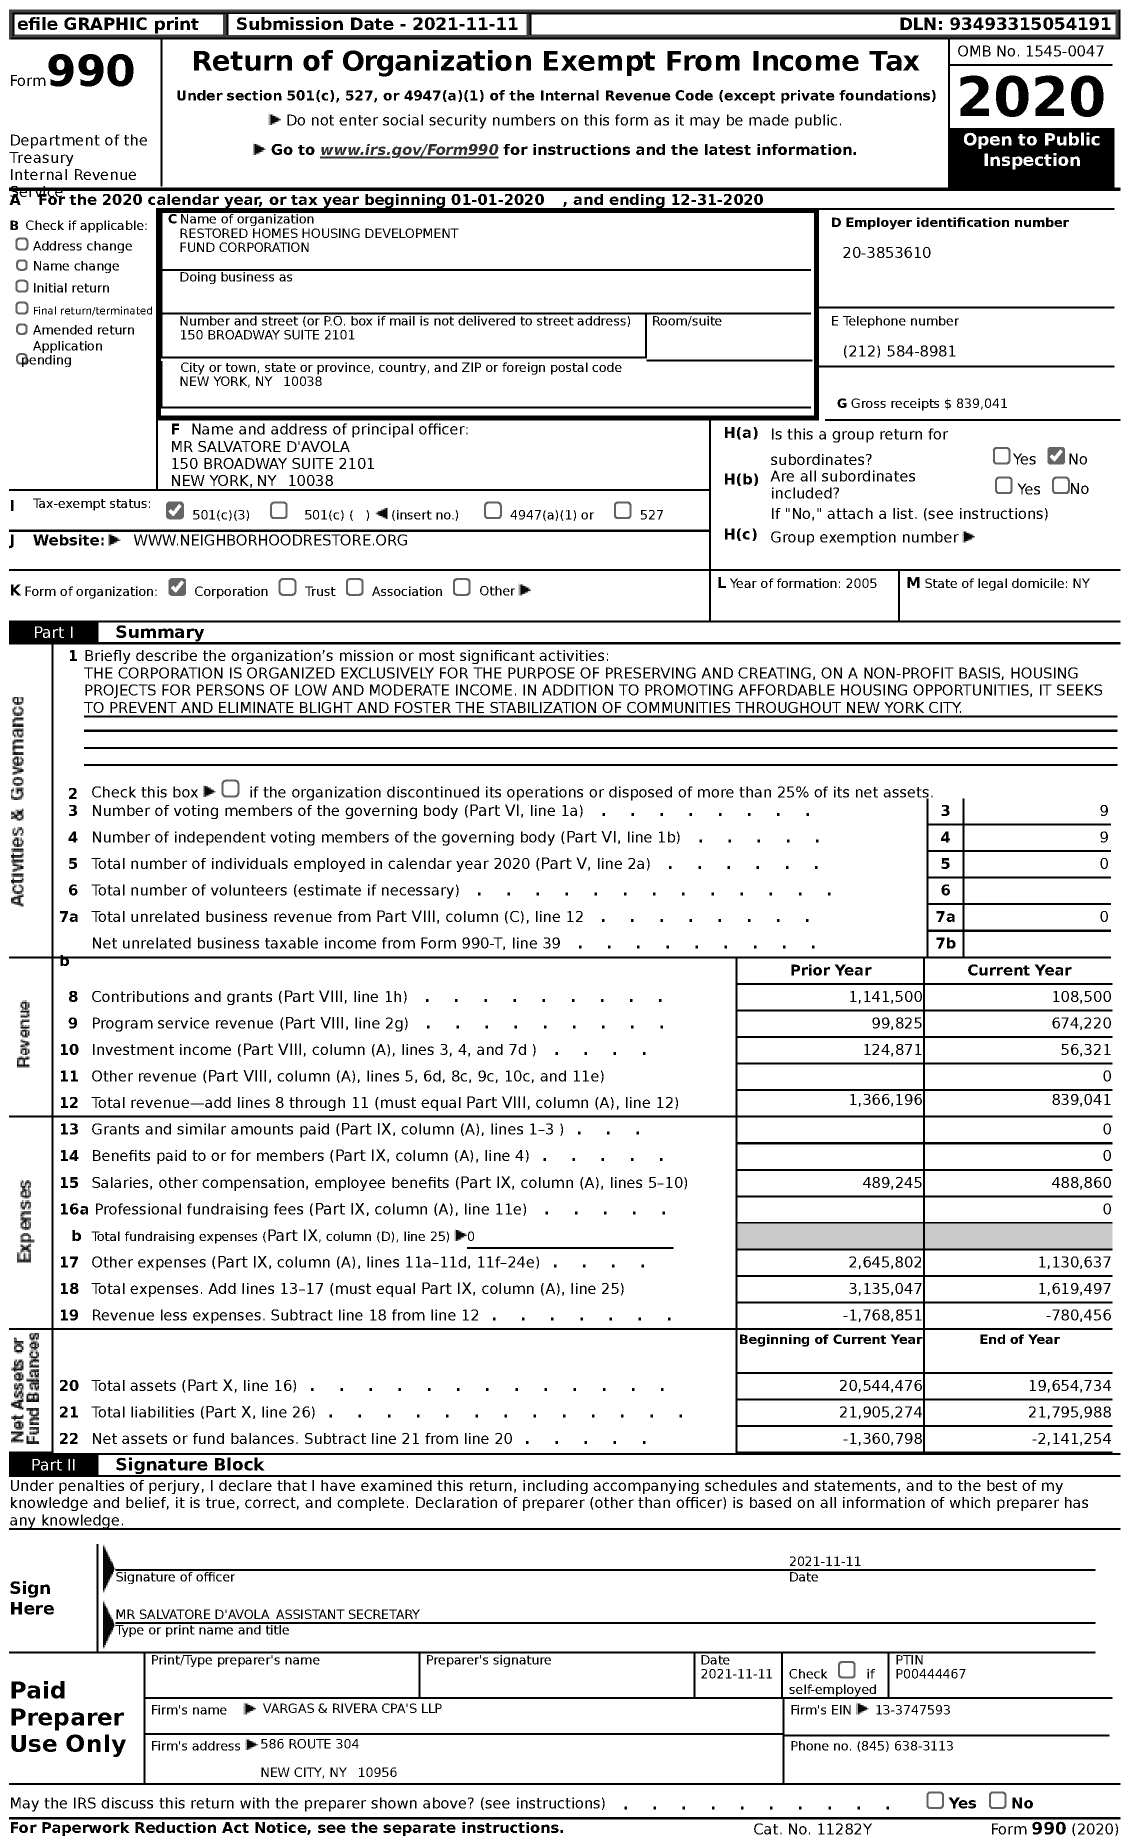 Image of first page of 2020 Form 990 for Restored Homes Housing Development Fund Corporation